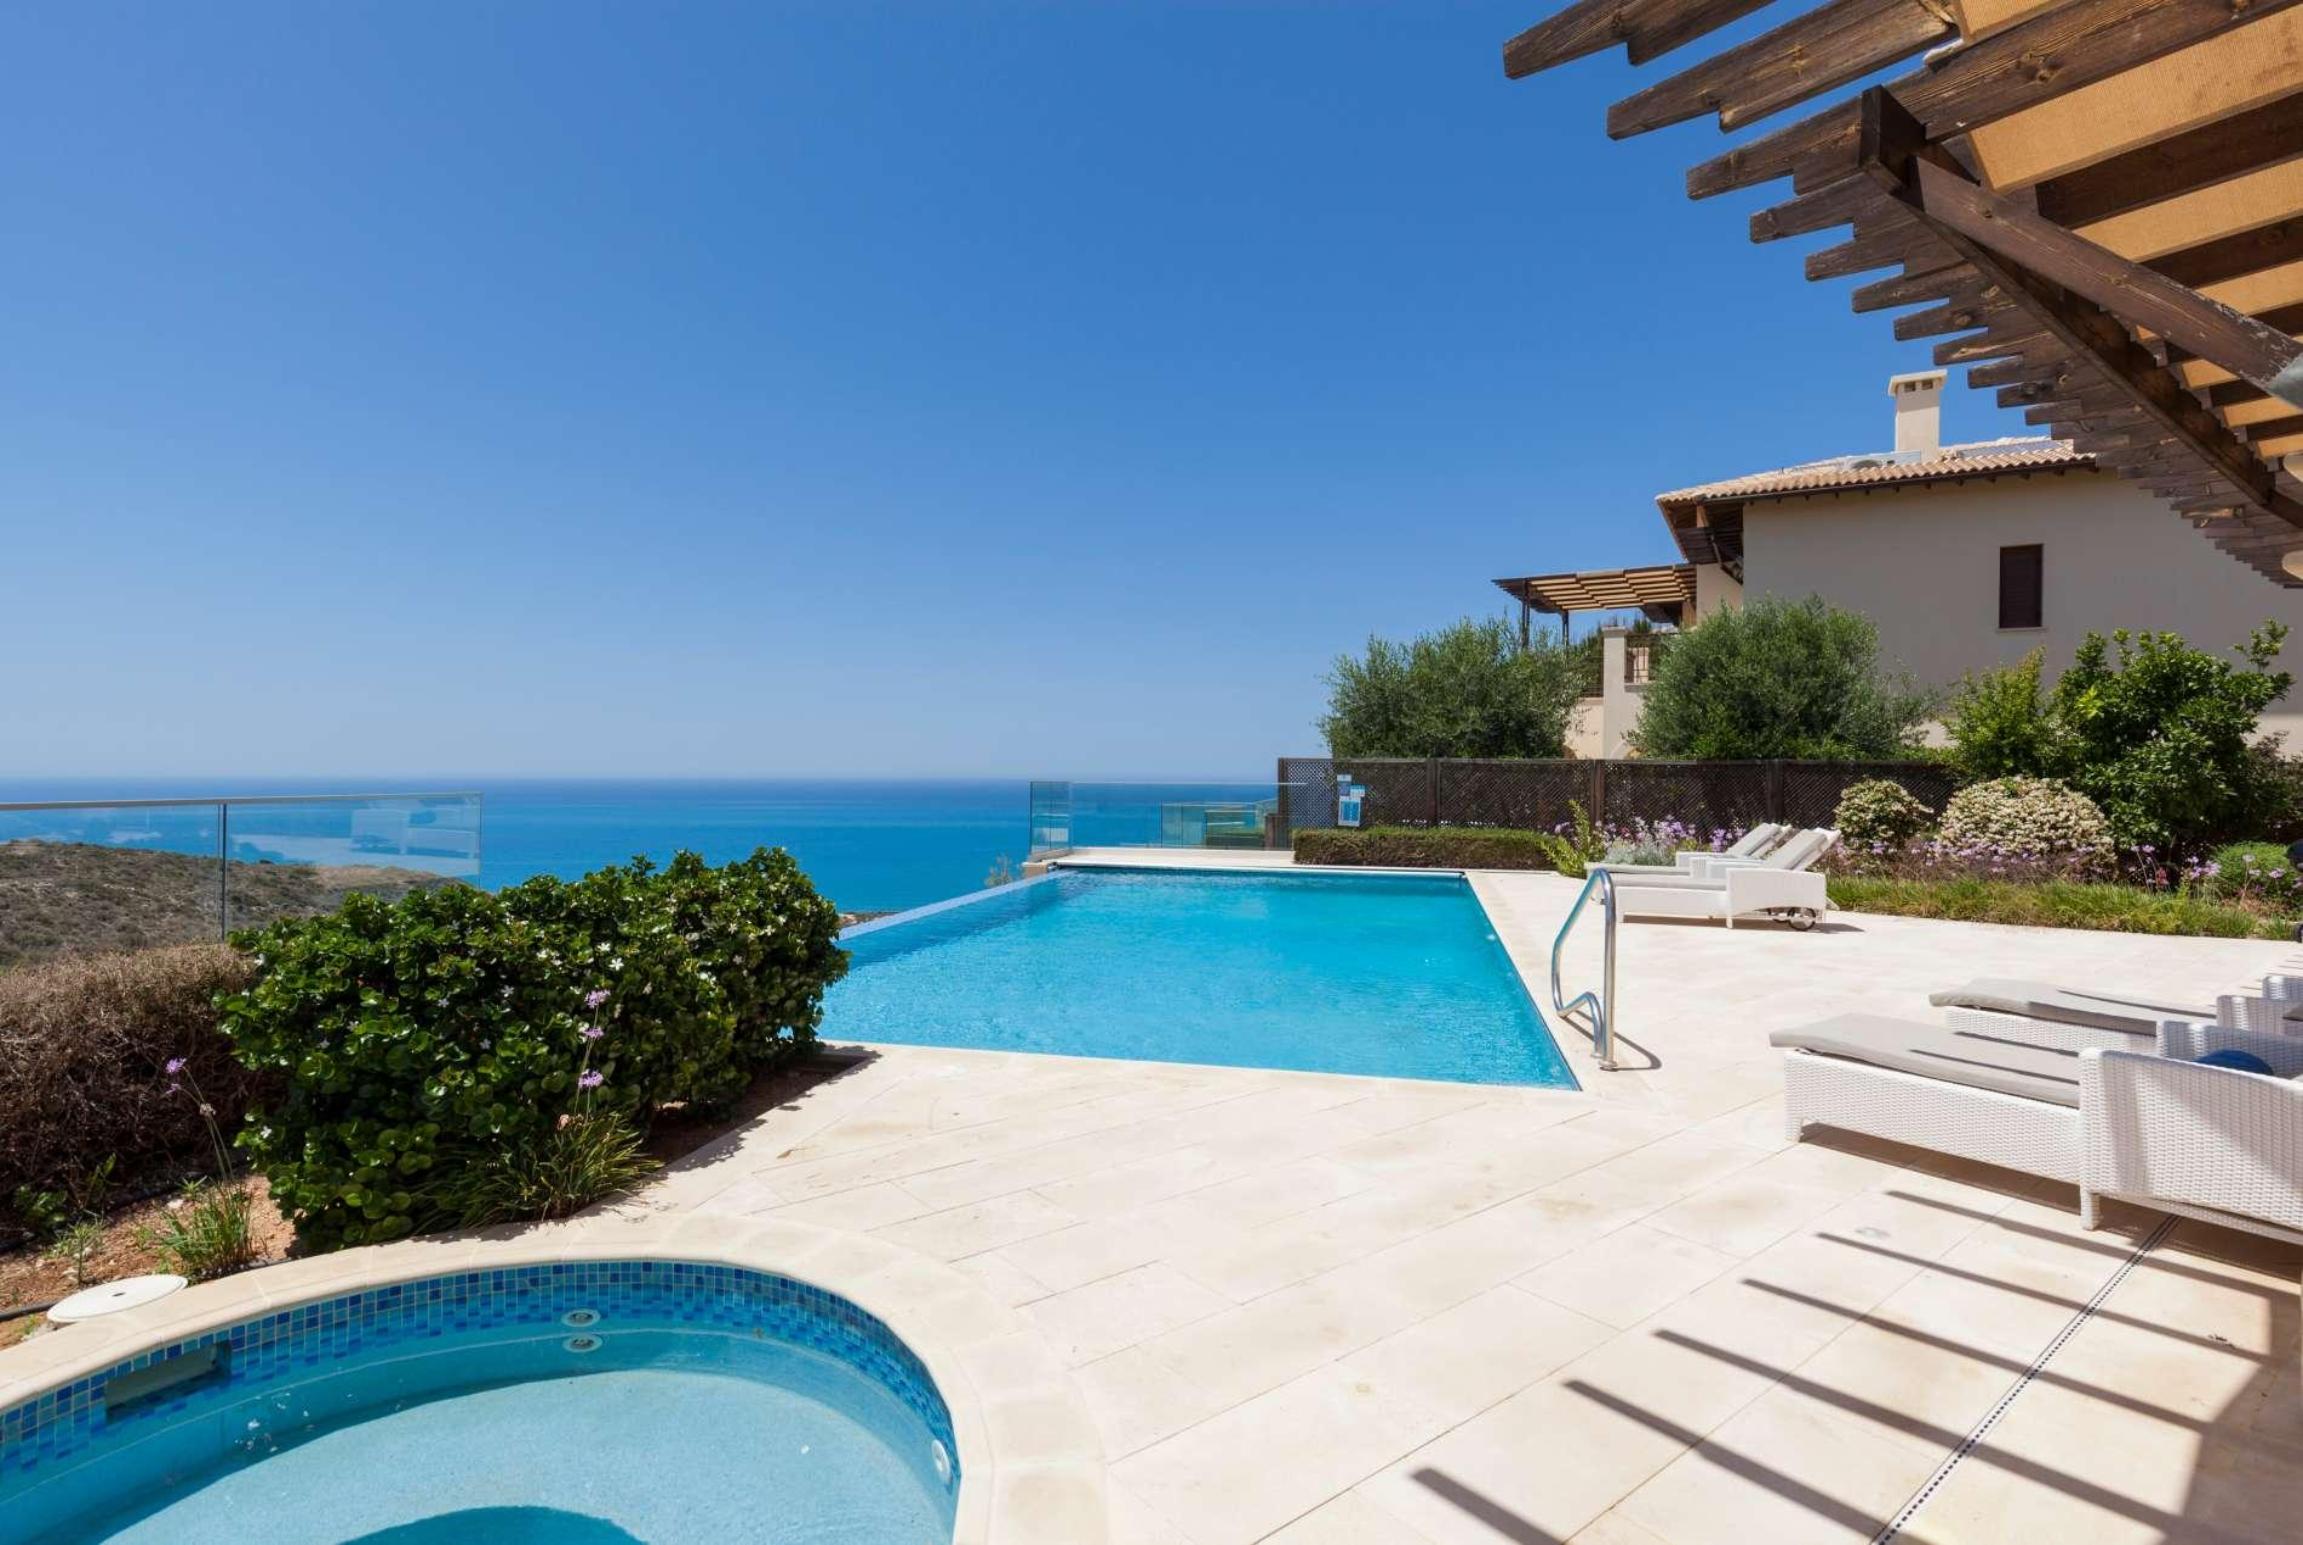 Property Image 1 - Posh Ocean View Villa with Hot Tub and Infinity Pool
